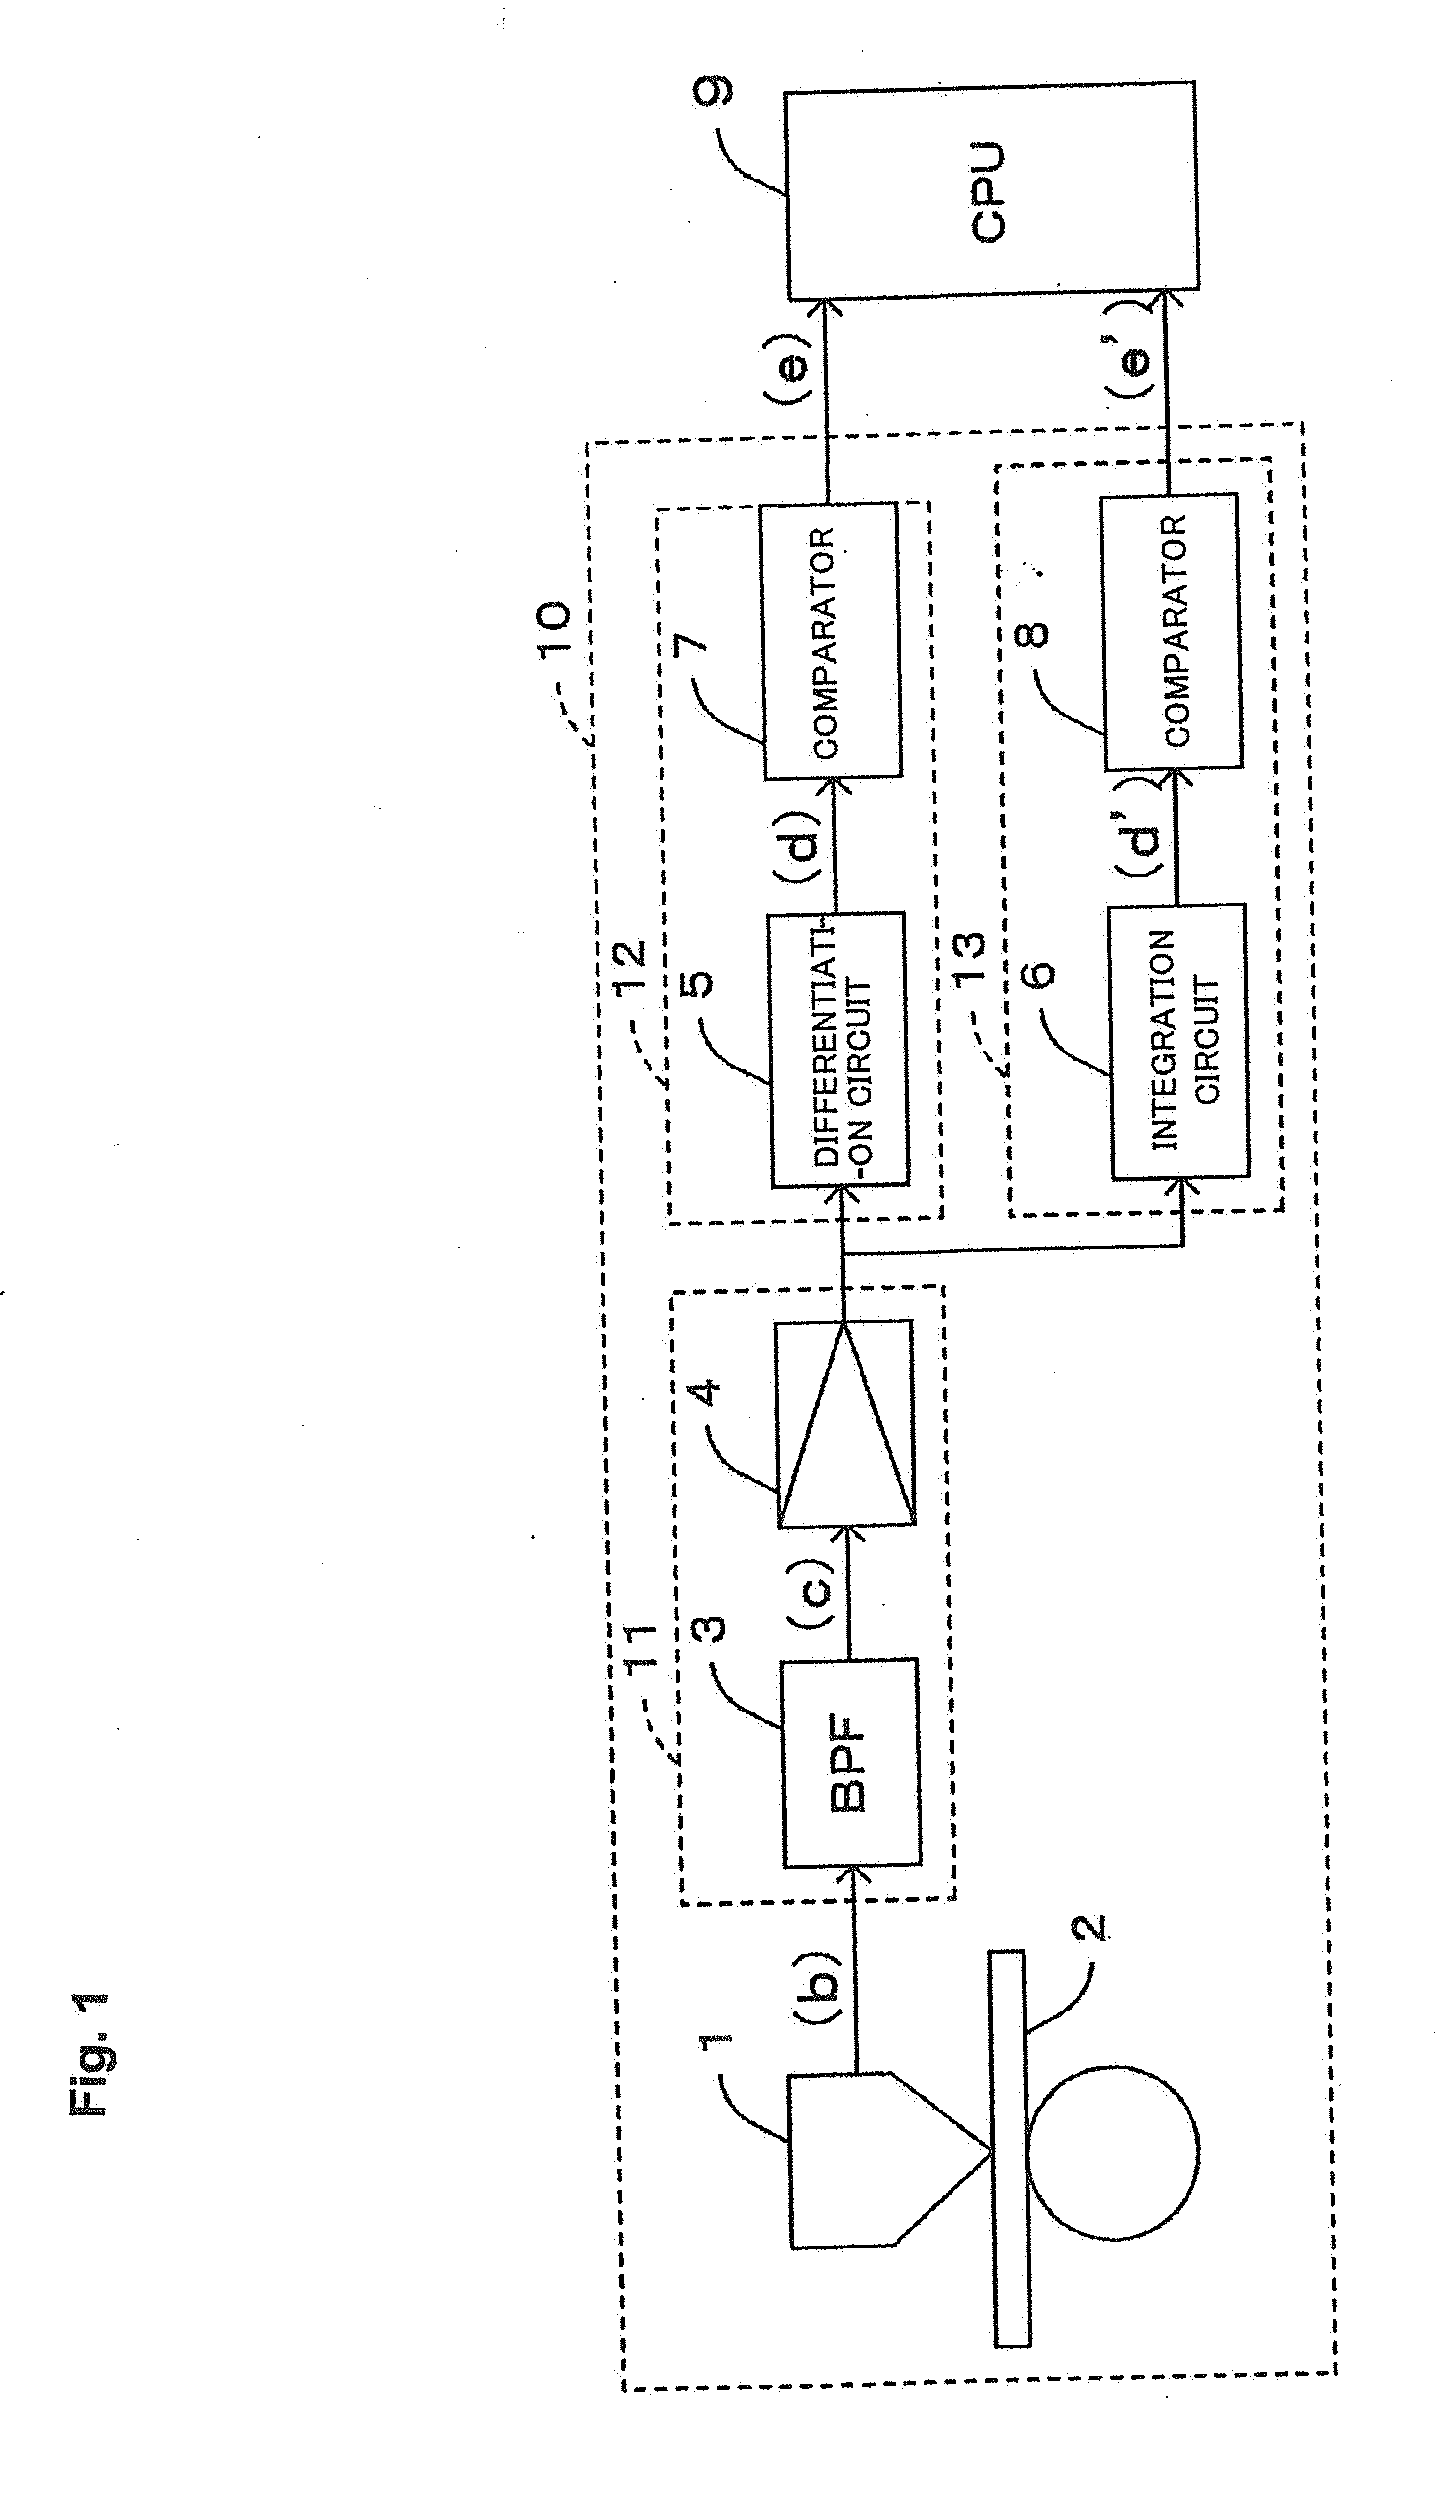 Magnetic data read circuit and card processing unit